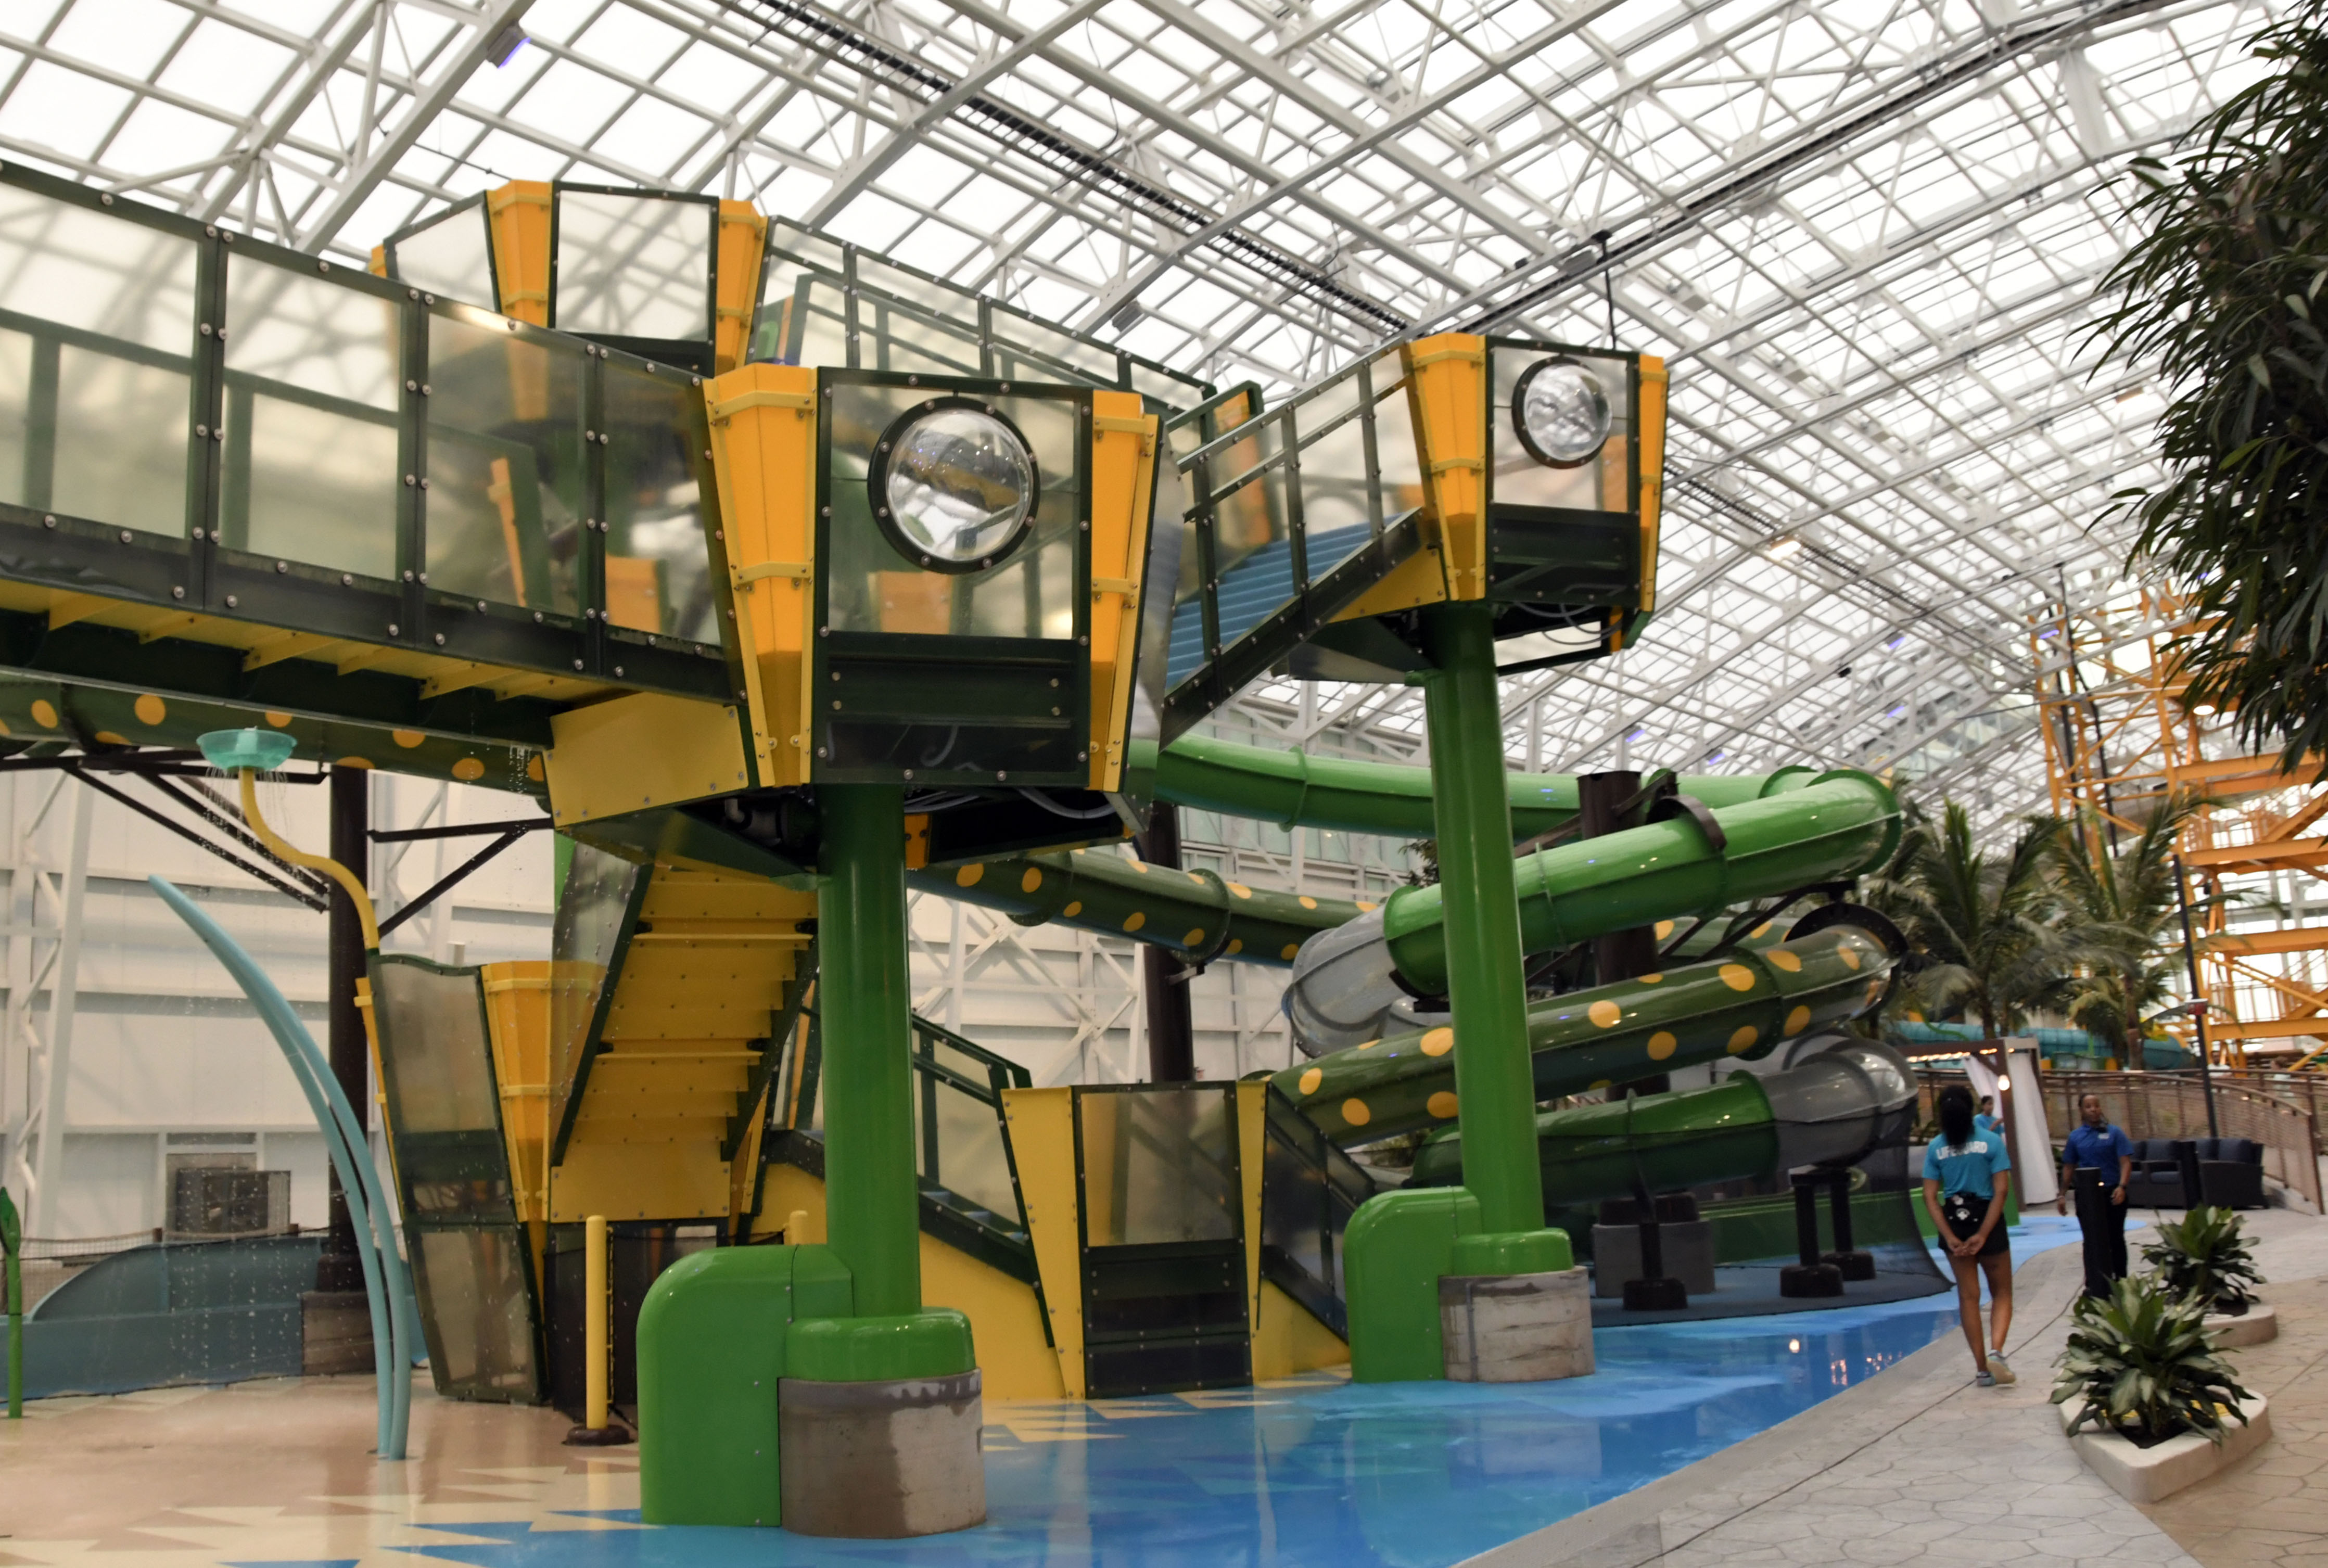 A Titanic New Water Park Has Opened With A Tidal Wave Of Entertainment -  Secret Houston